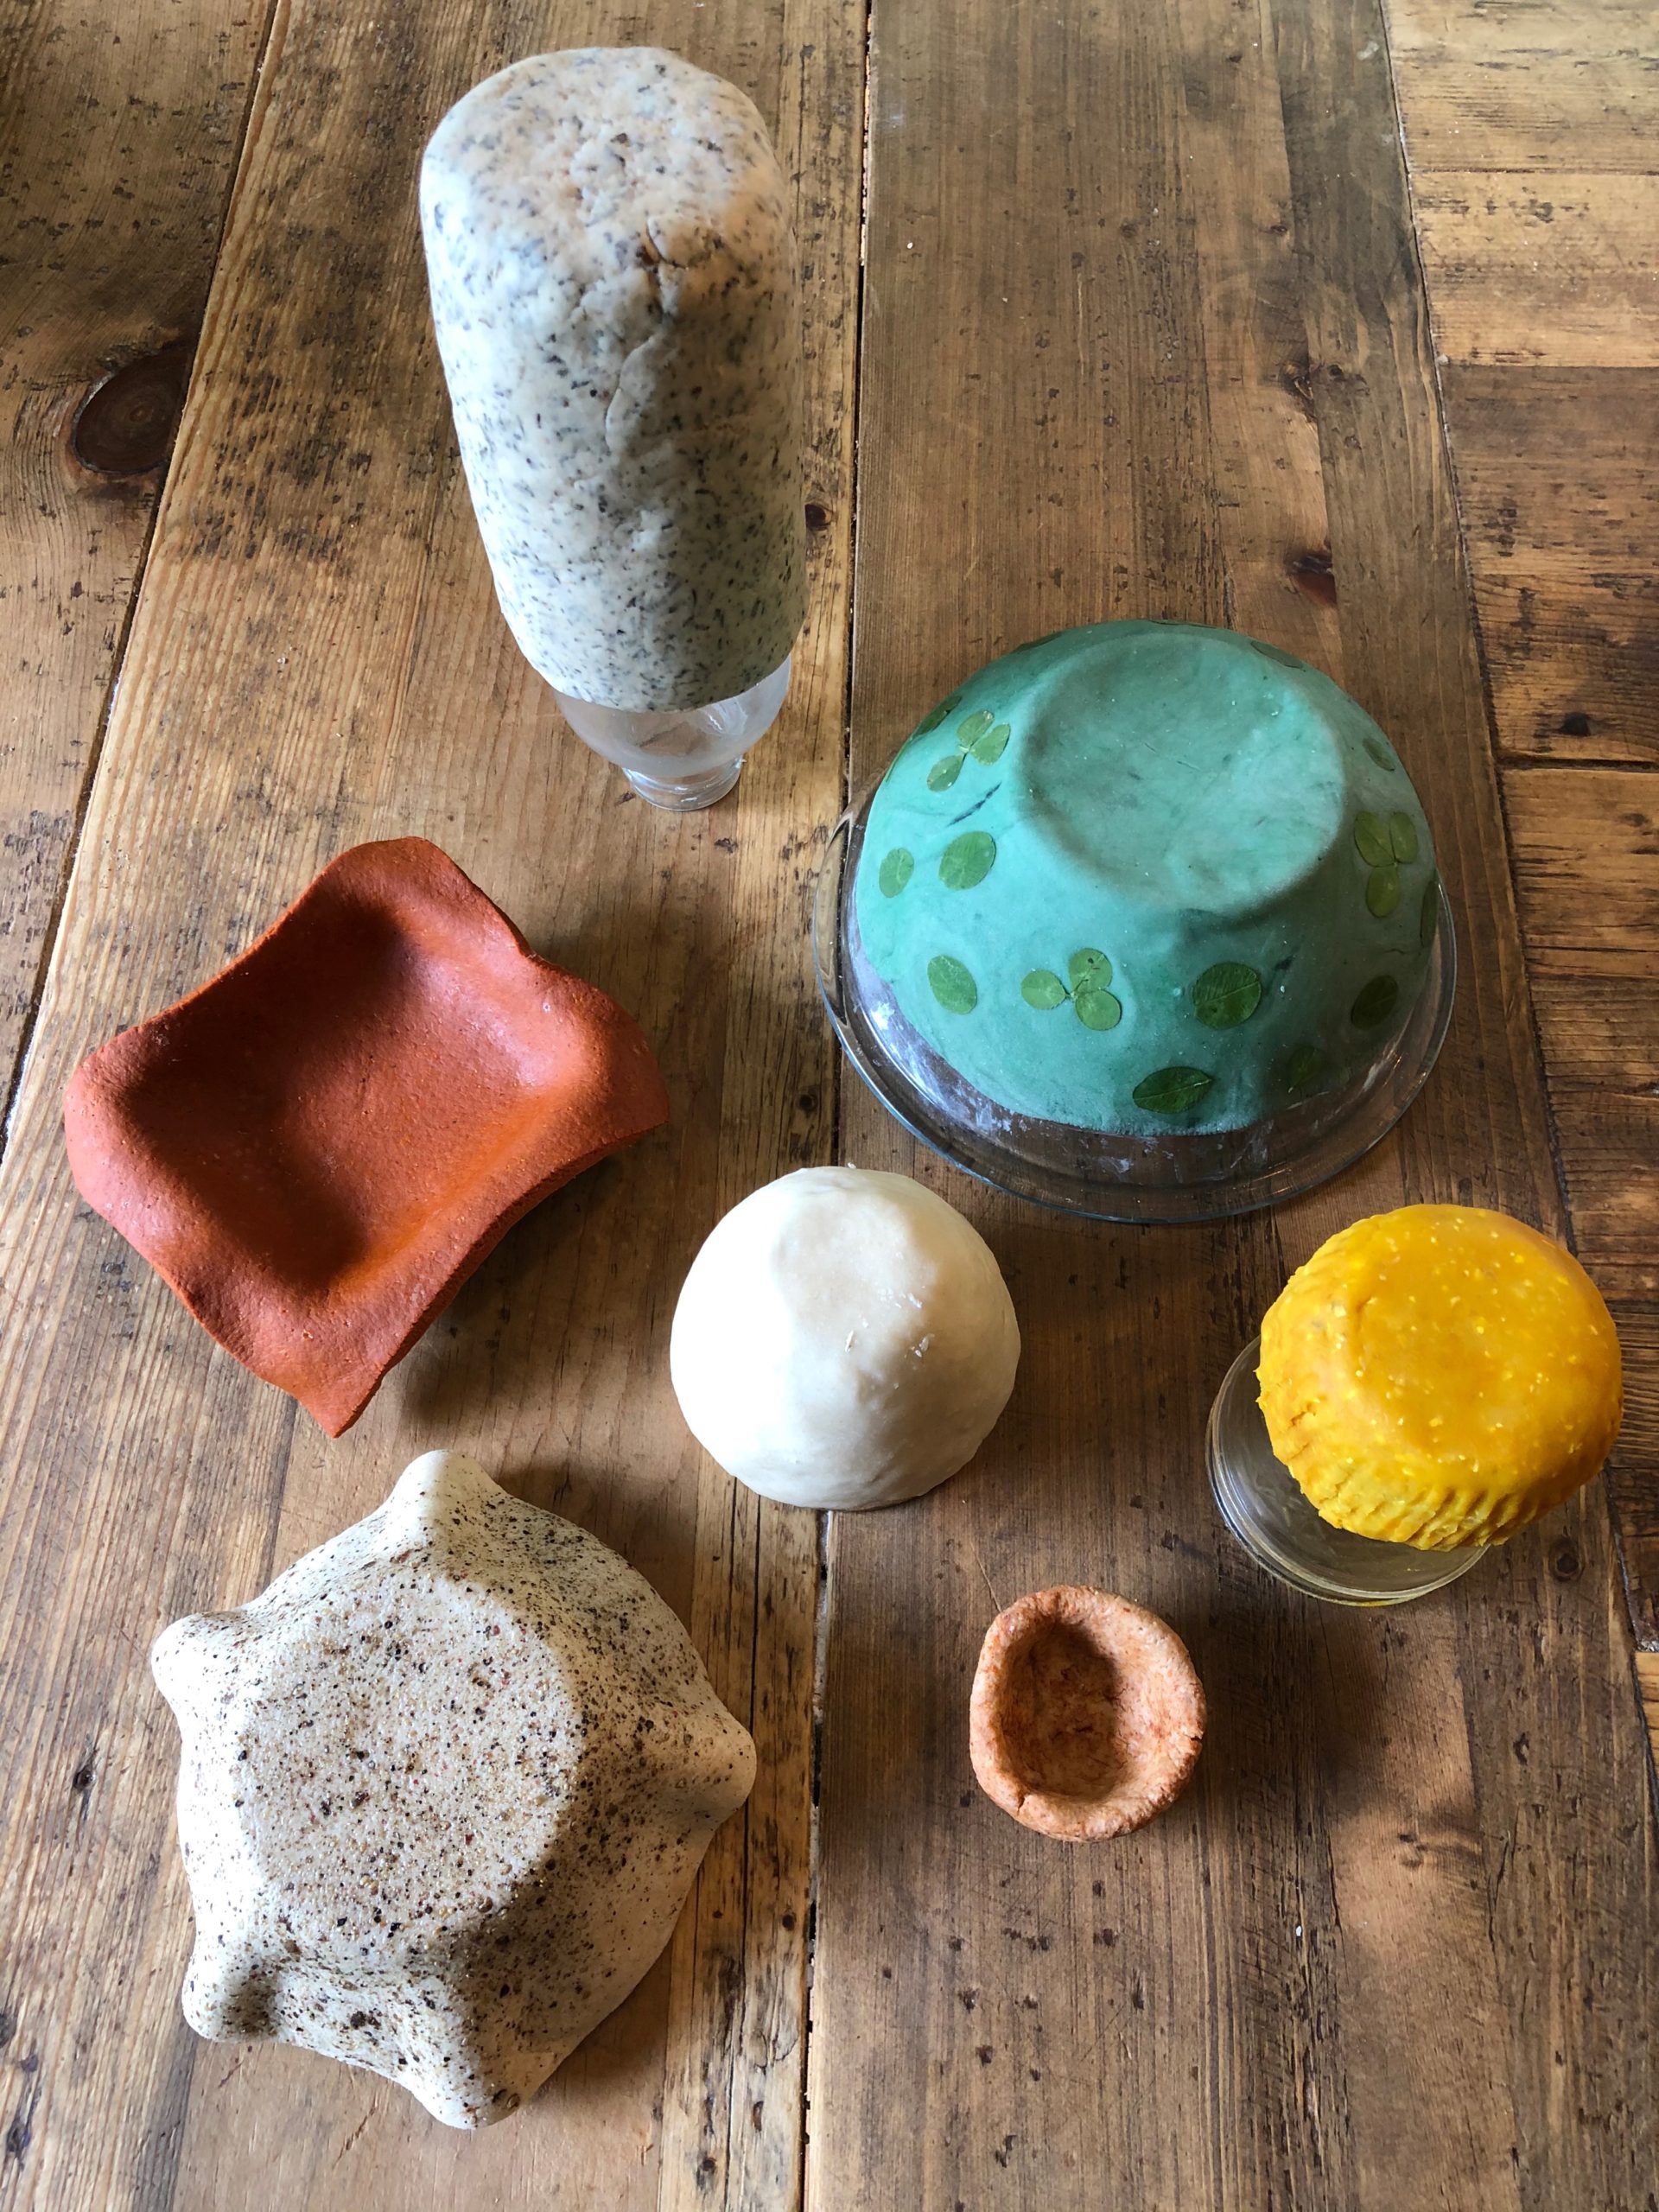 Make your own clay creations with three ingredients already in